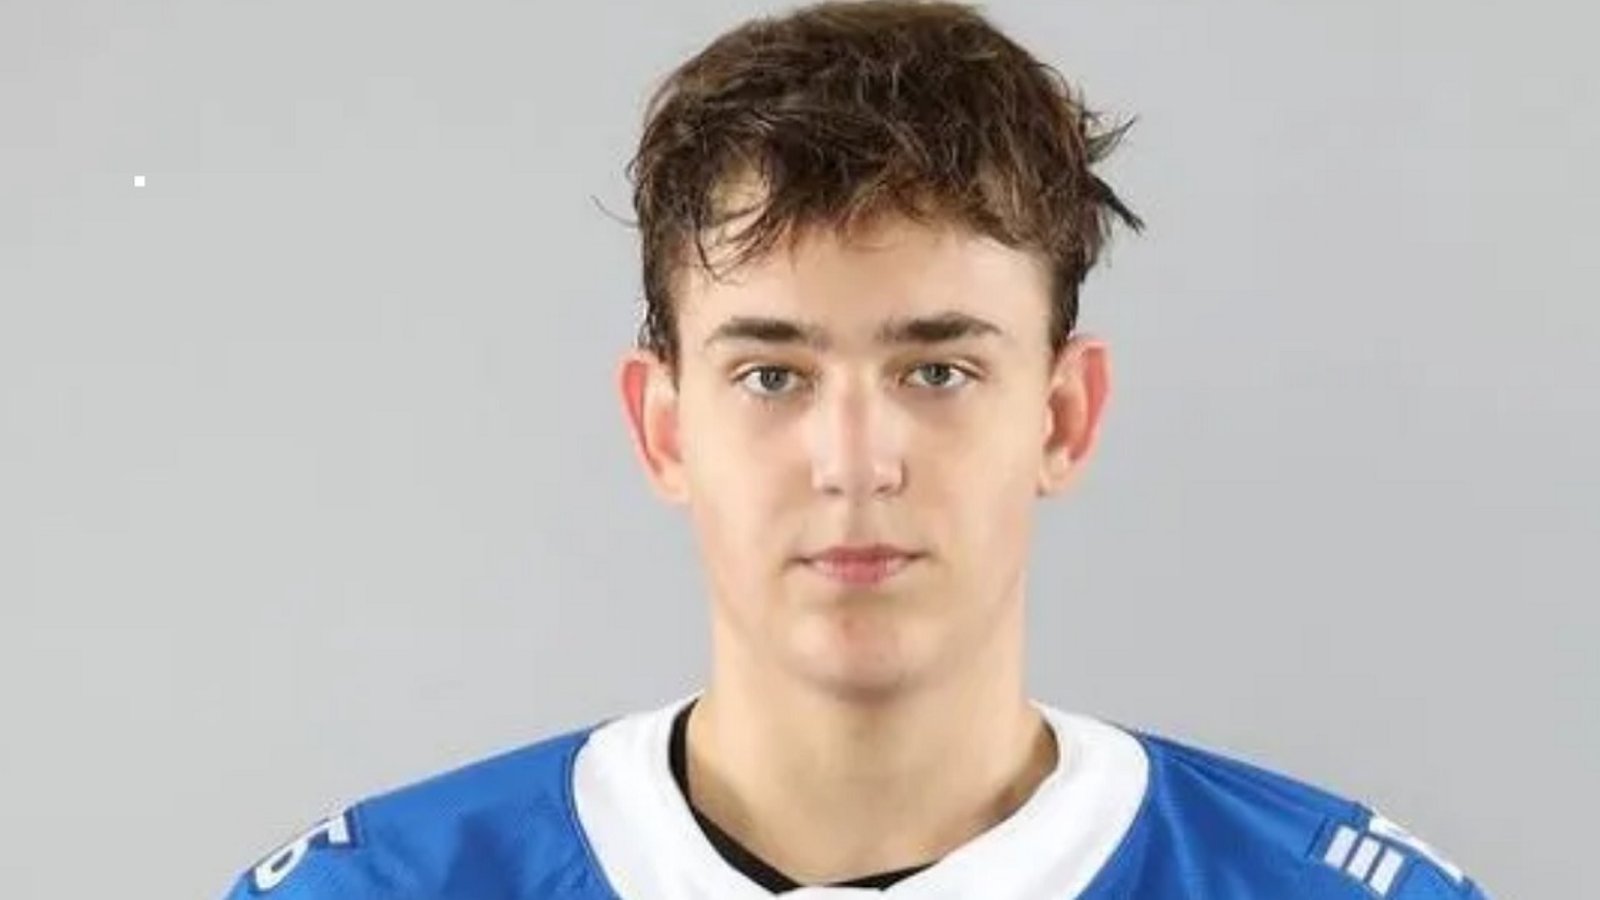 Young hockey player dies tragically after fighting for his life.